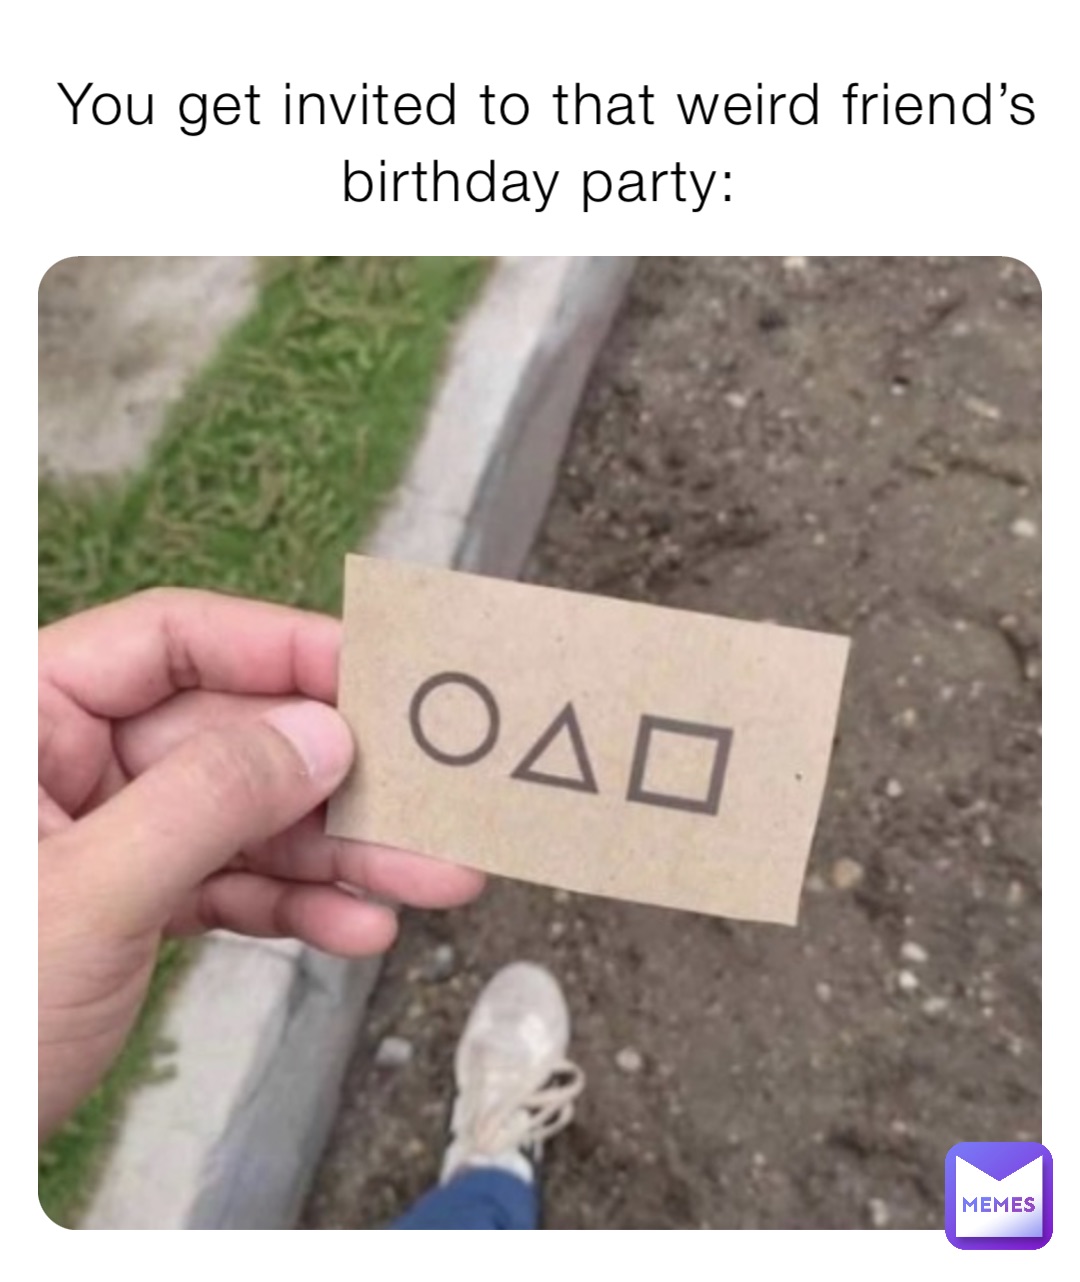 You get invited to that weird friend’s birthday party: